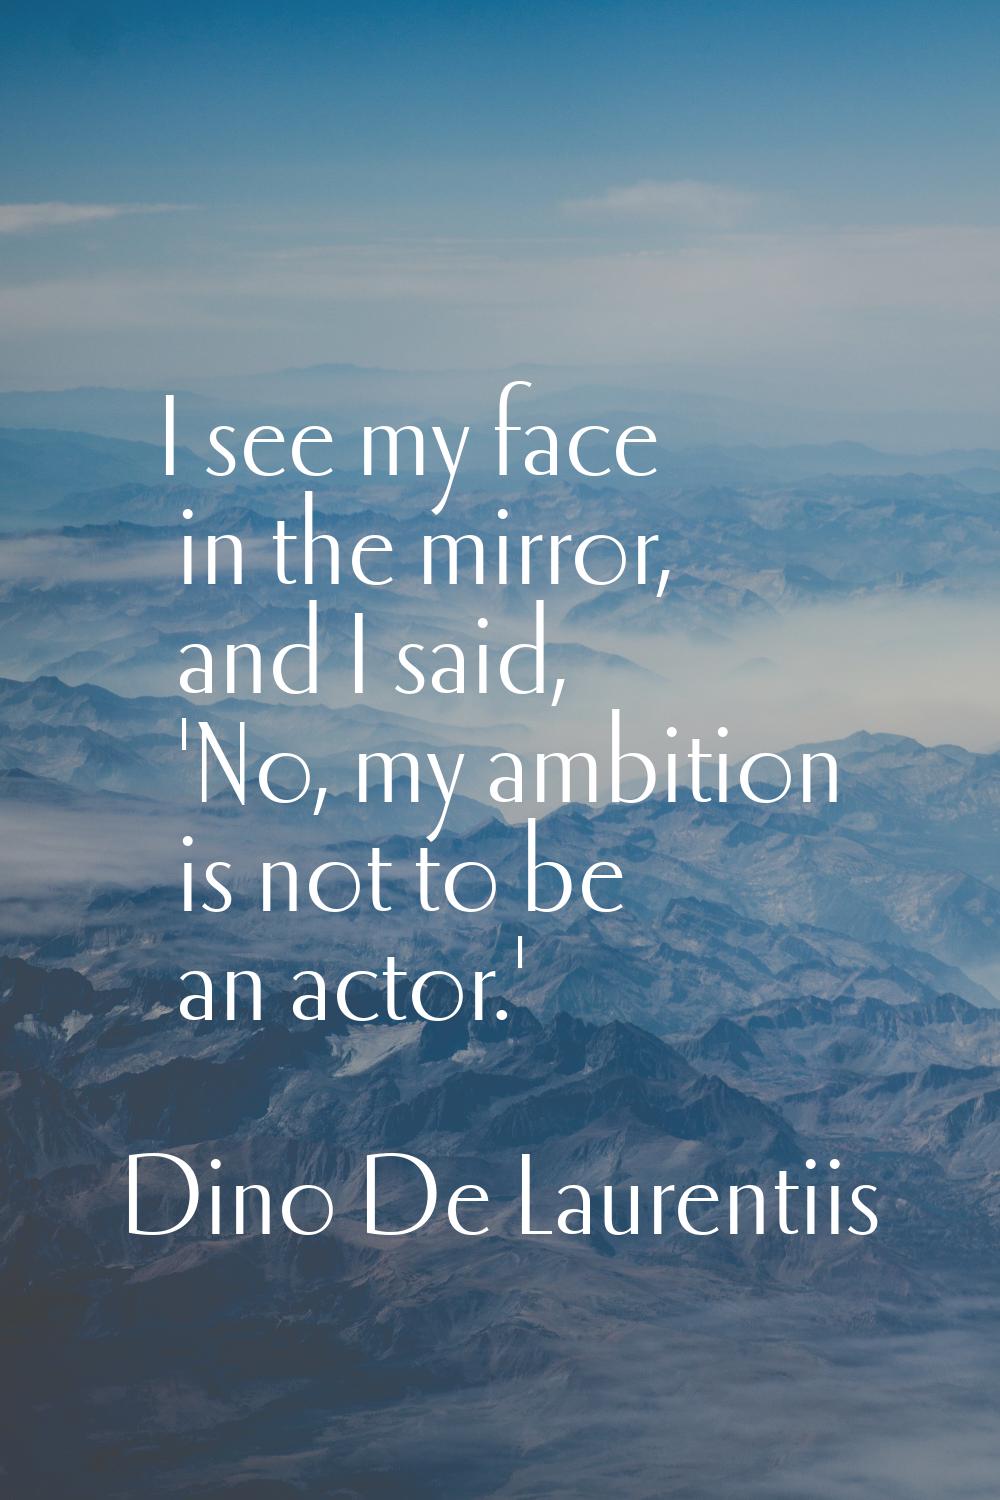 I see my face in the mirror, and I said, 'No, my ambition is not to be an actor.'